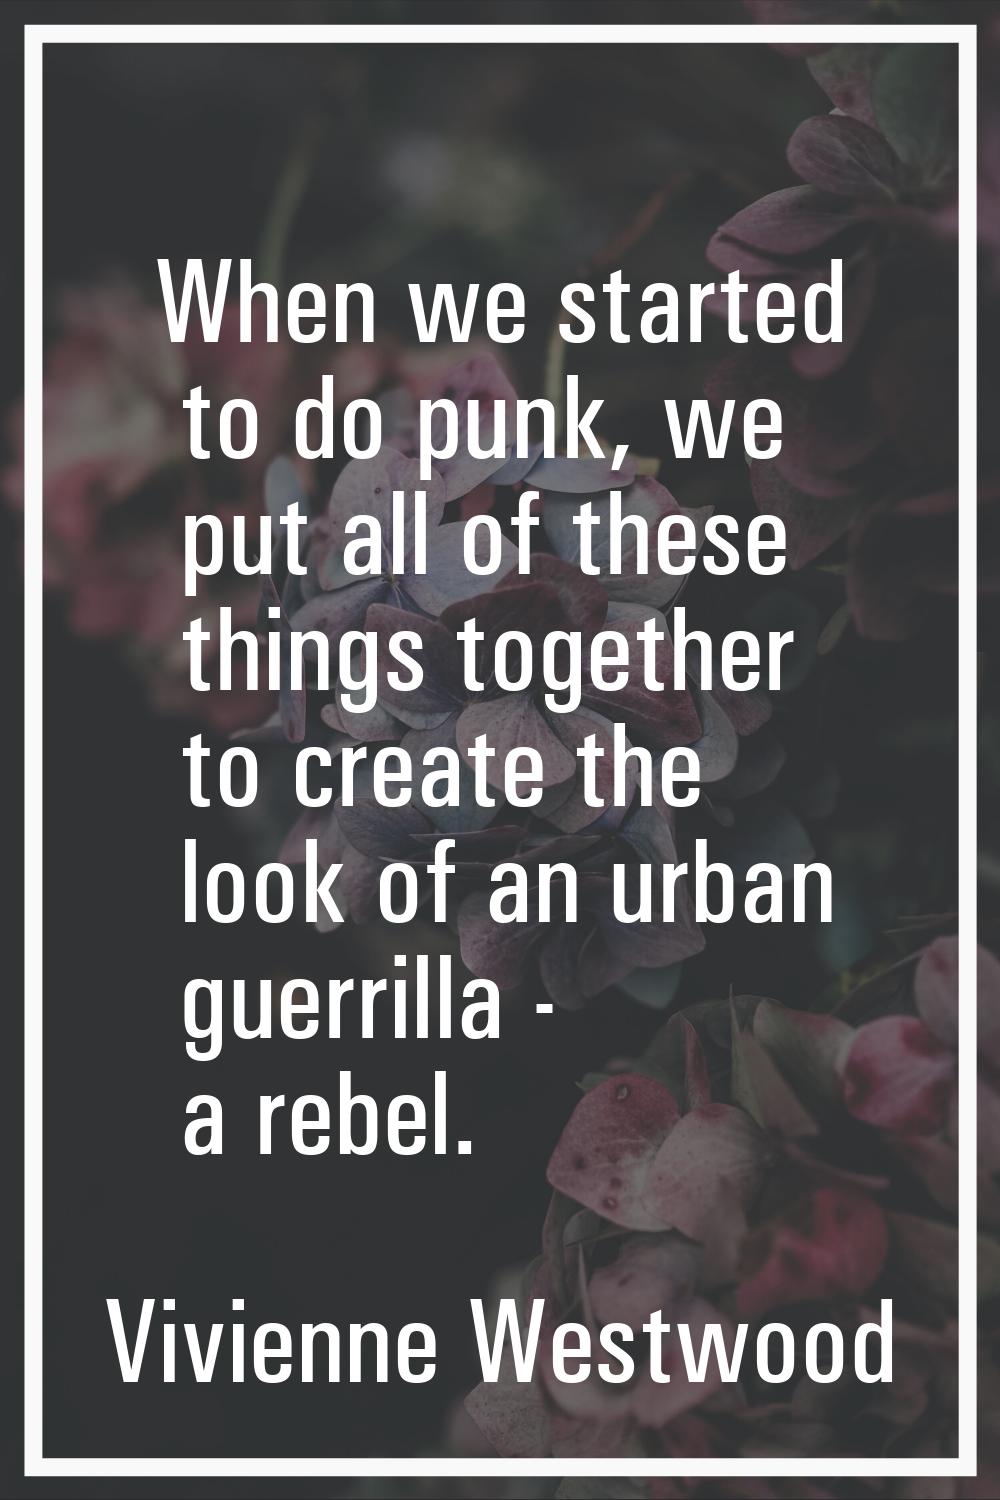 When we started to do punk, we put all of these things together to create the look of an urban guer